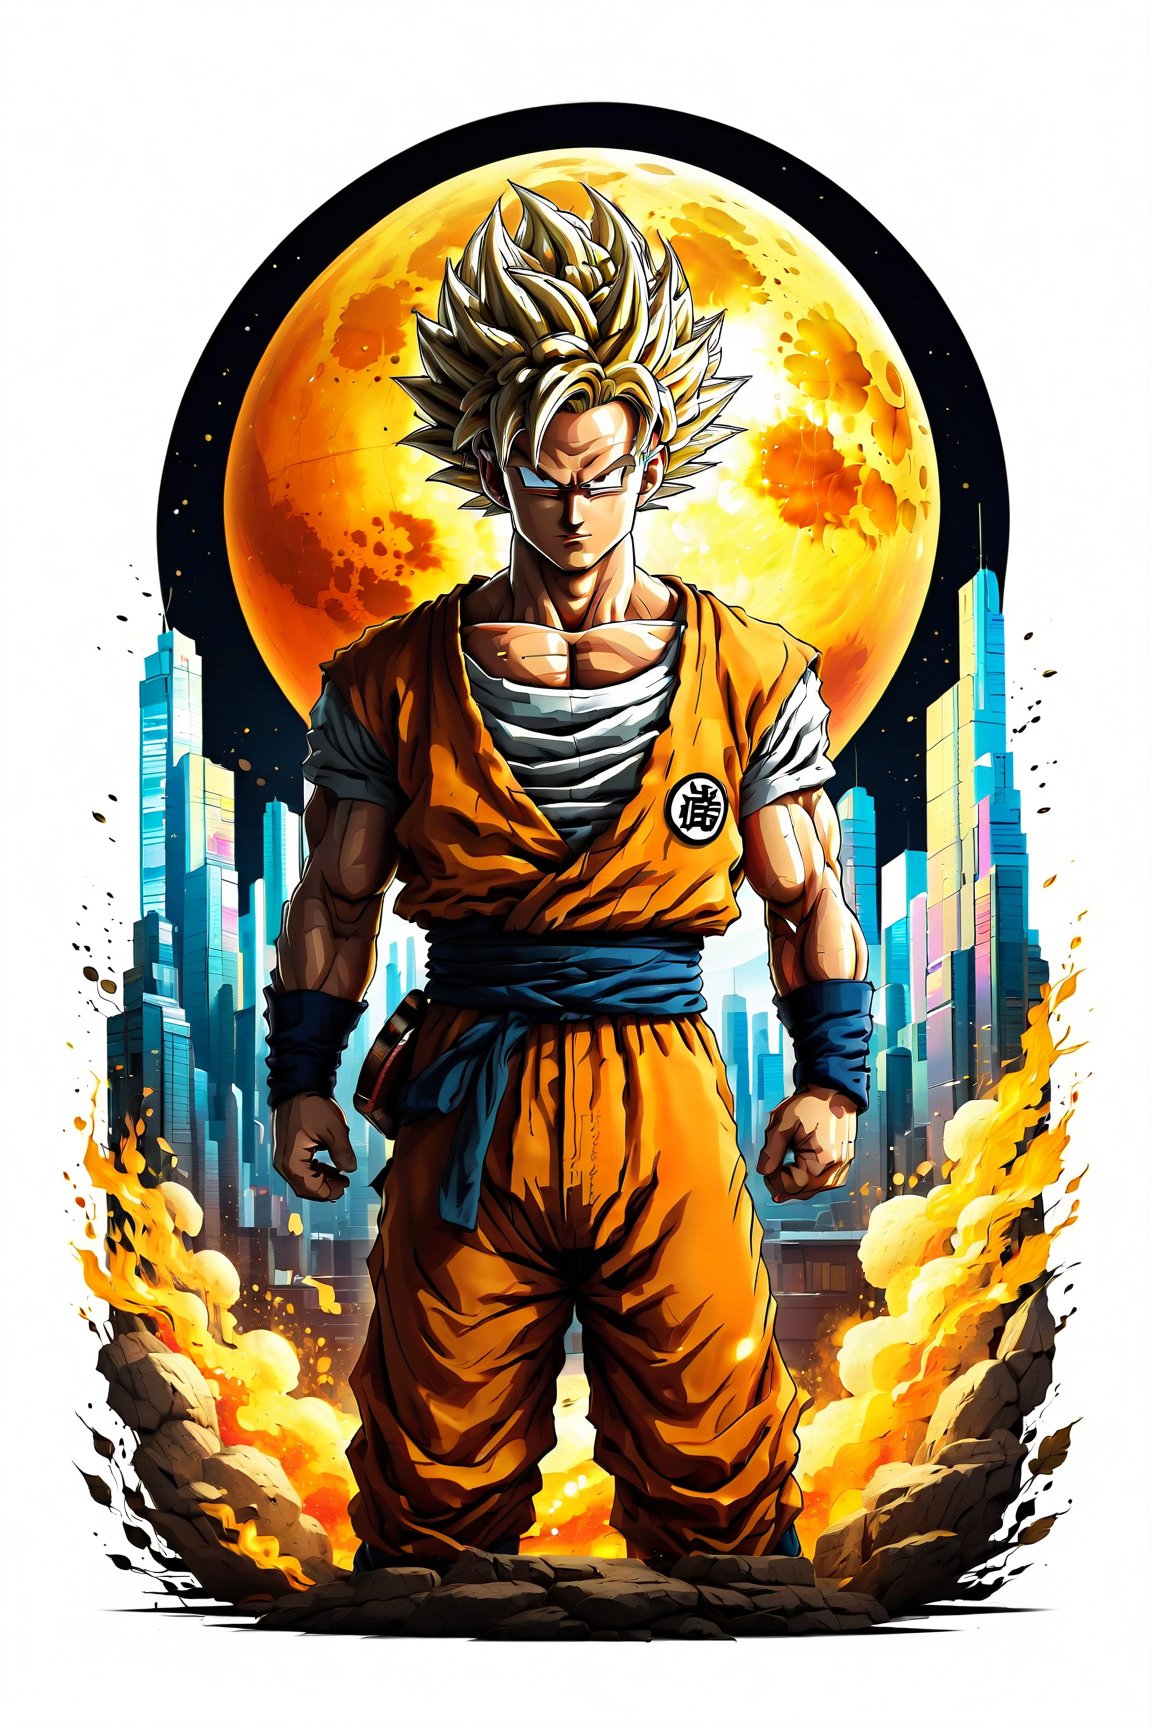 anime style illustration of Dragon ball, detailed design and urban style t-shirt design, solid color background, pro vector, 4K resolution

